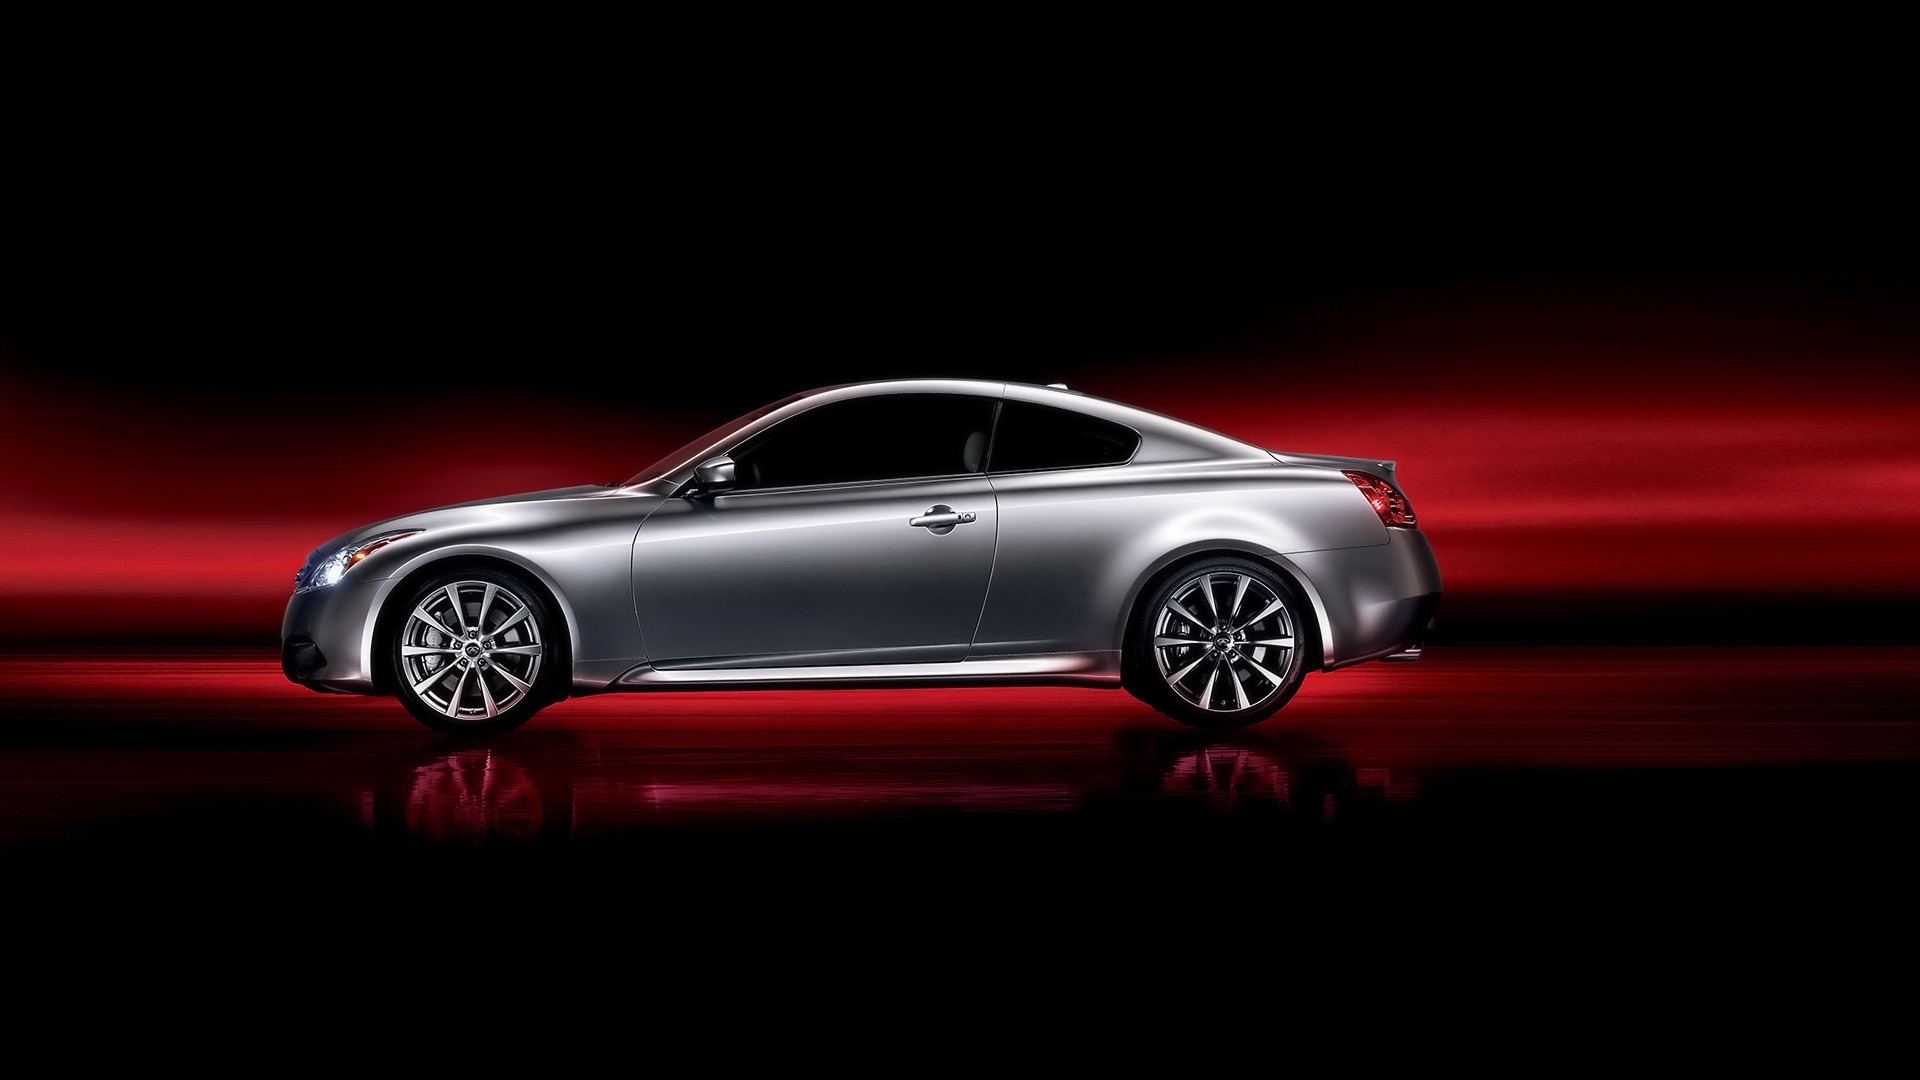 Grey Infiniti G37 Coupe for 1920 x 1080 HDTV 1080p resolution